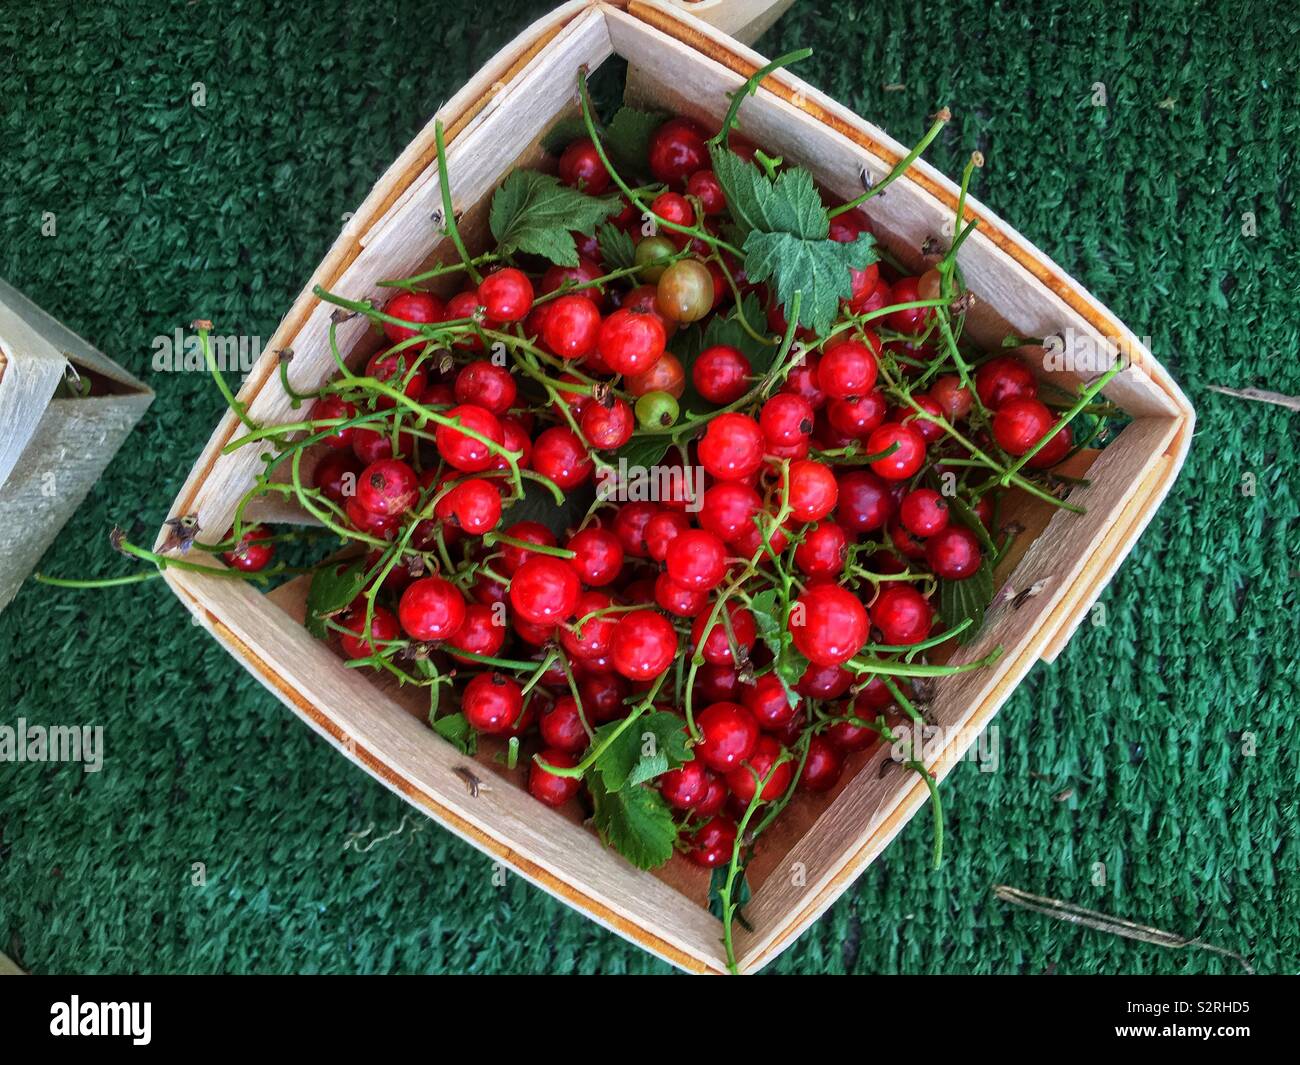 Farm fresh ripe red currants in a basket. Stock Photo